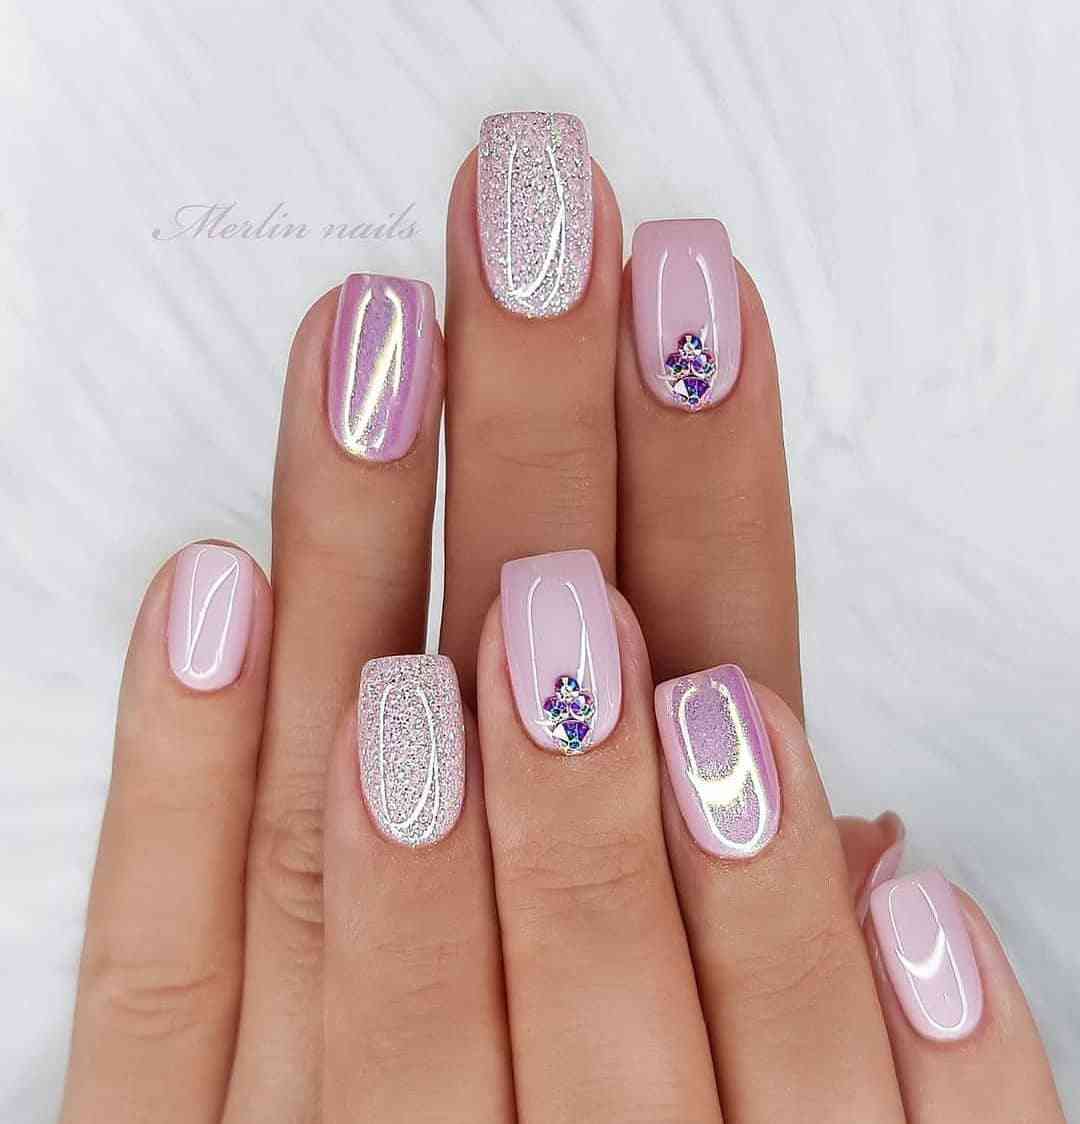 The 100+ Best Nail Designs Trends And Ideas In 2021 images 5